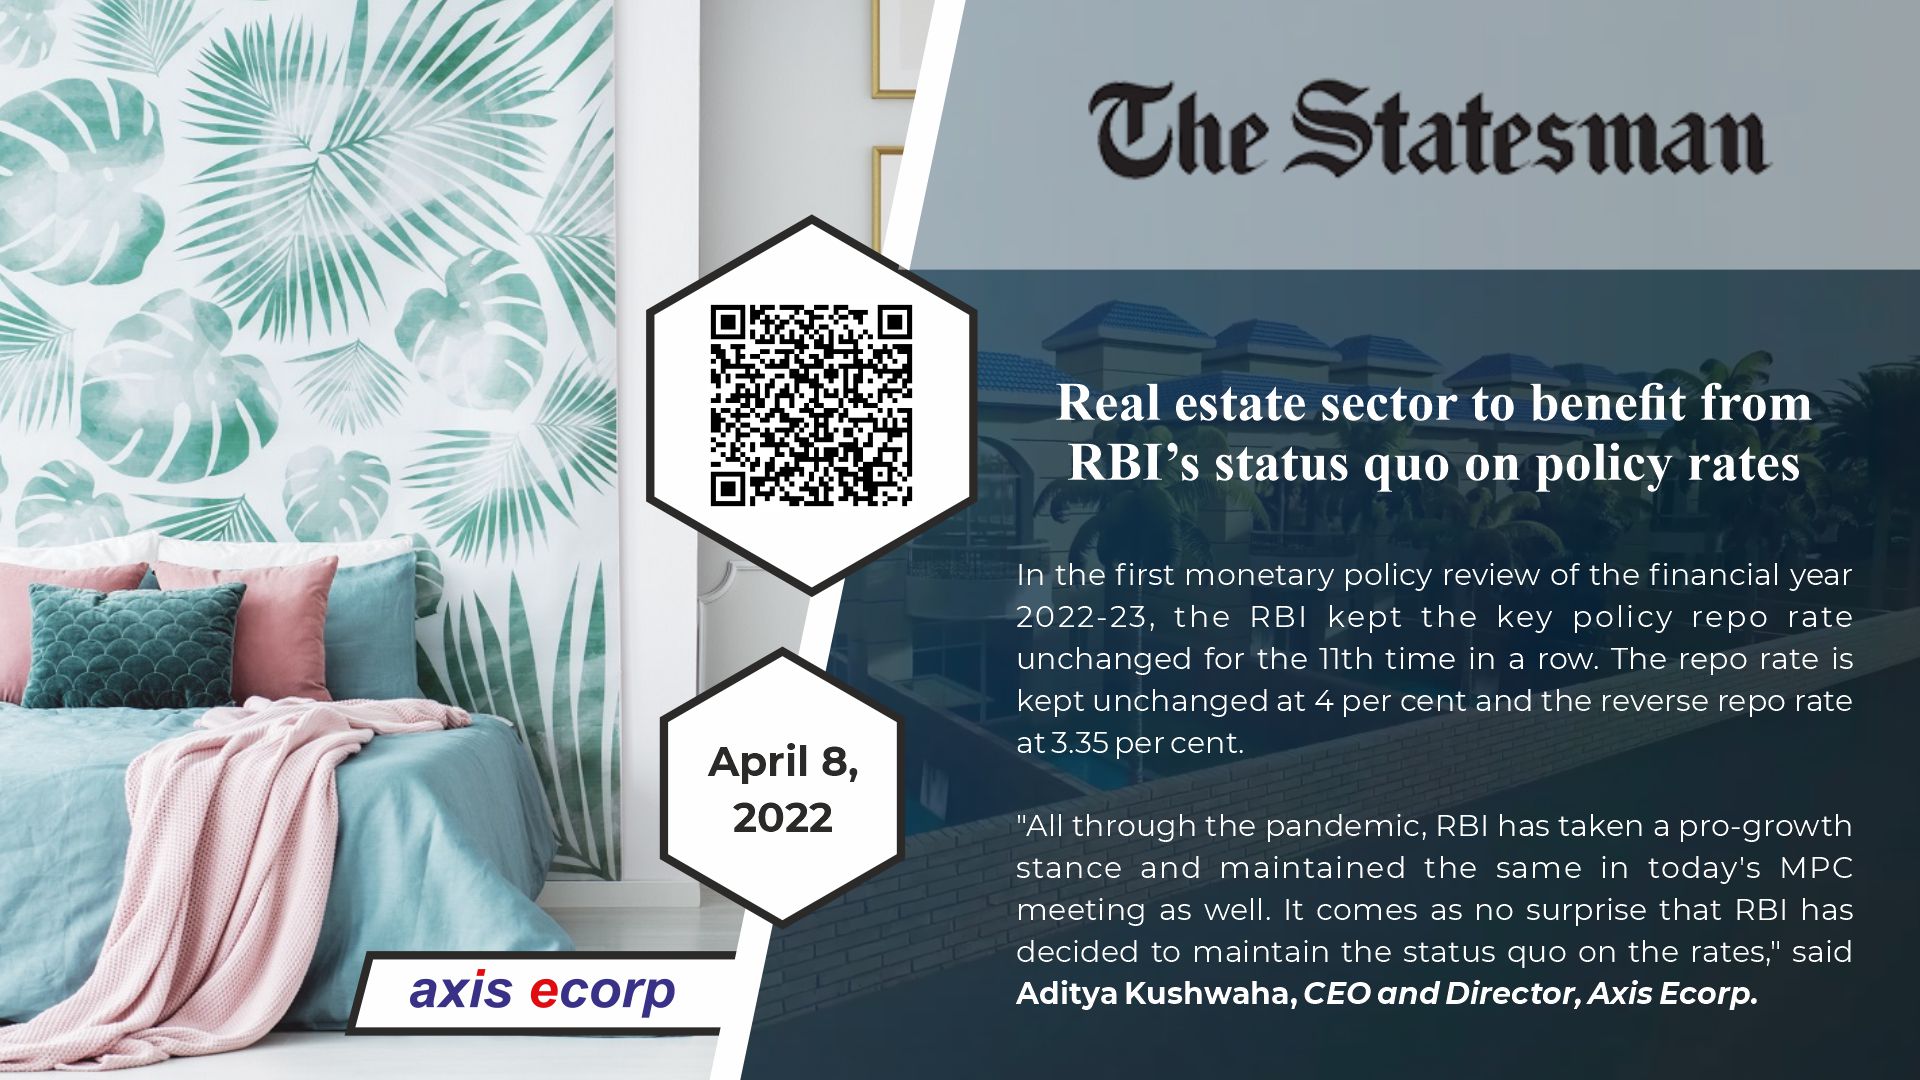 real estate sector to benefit from RBI’s status quo on policy rates